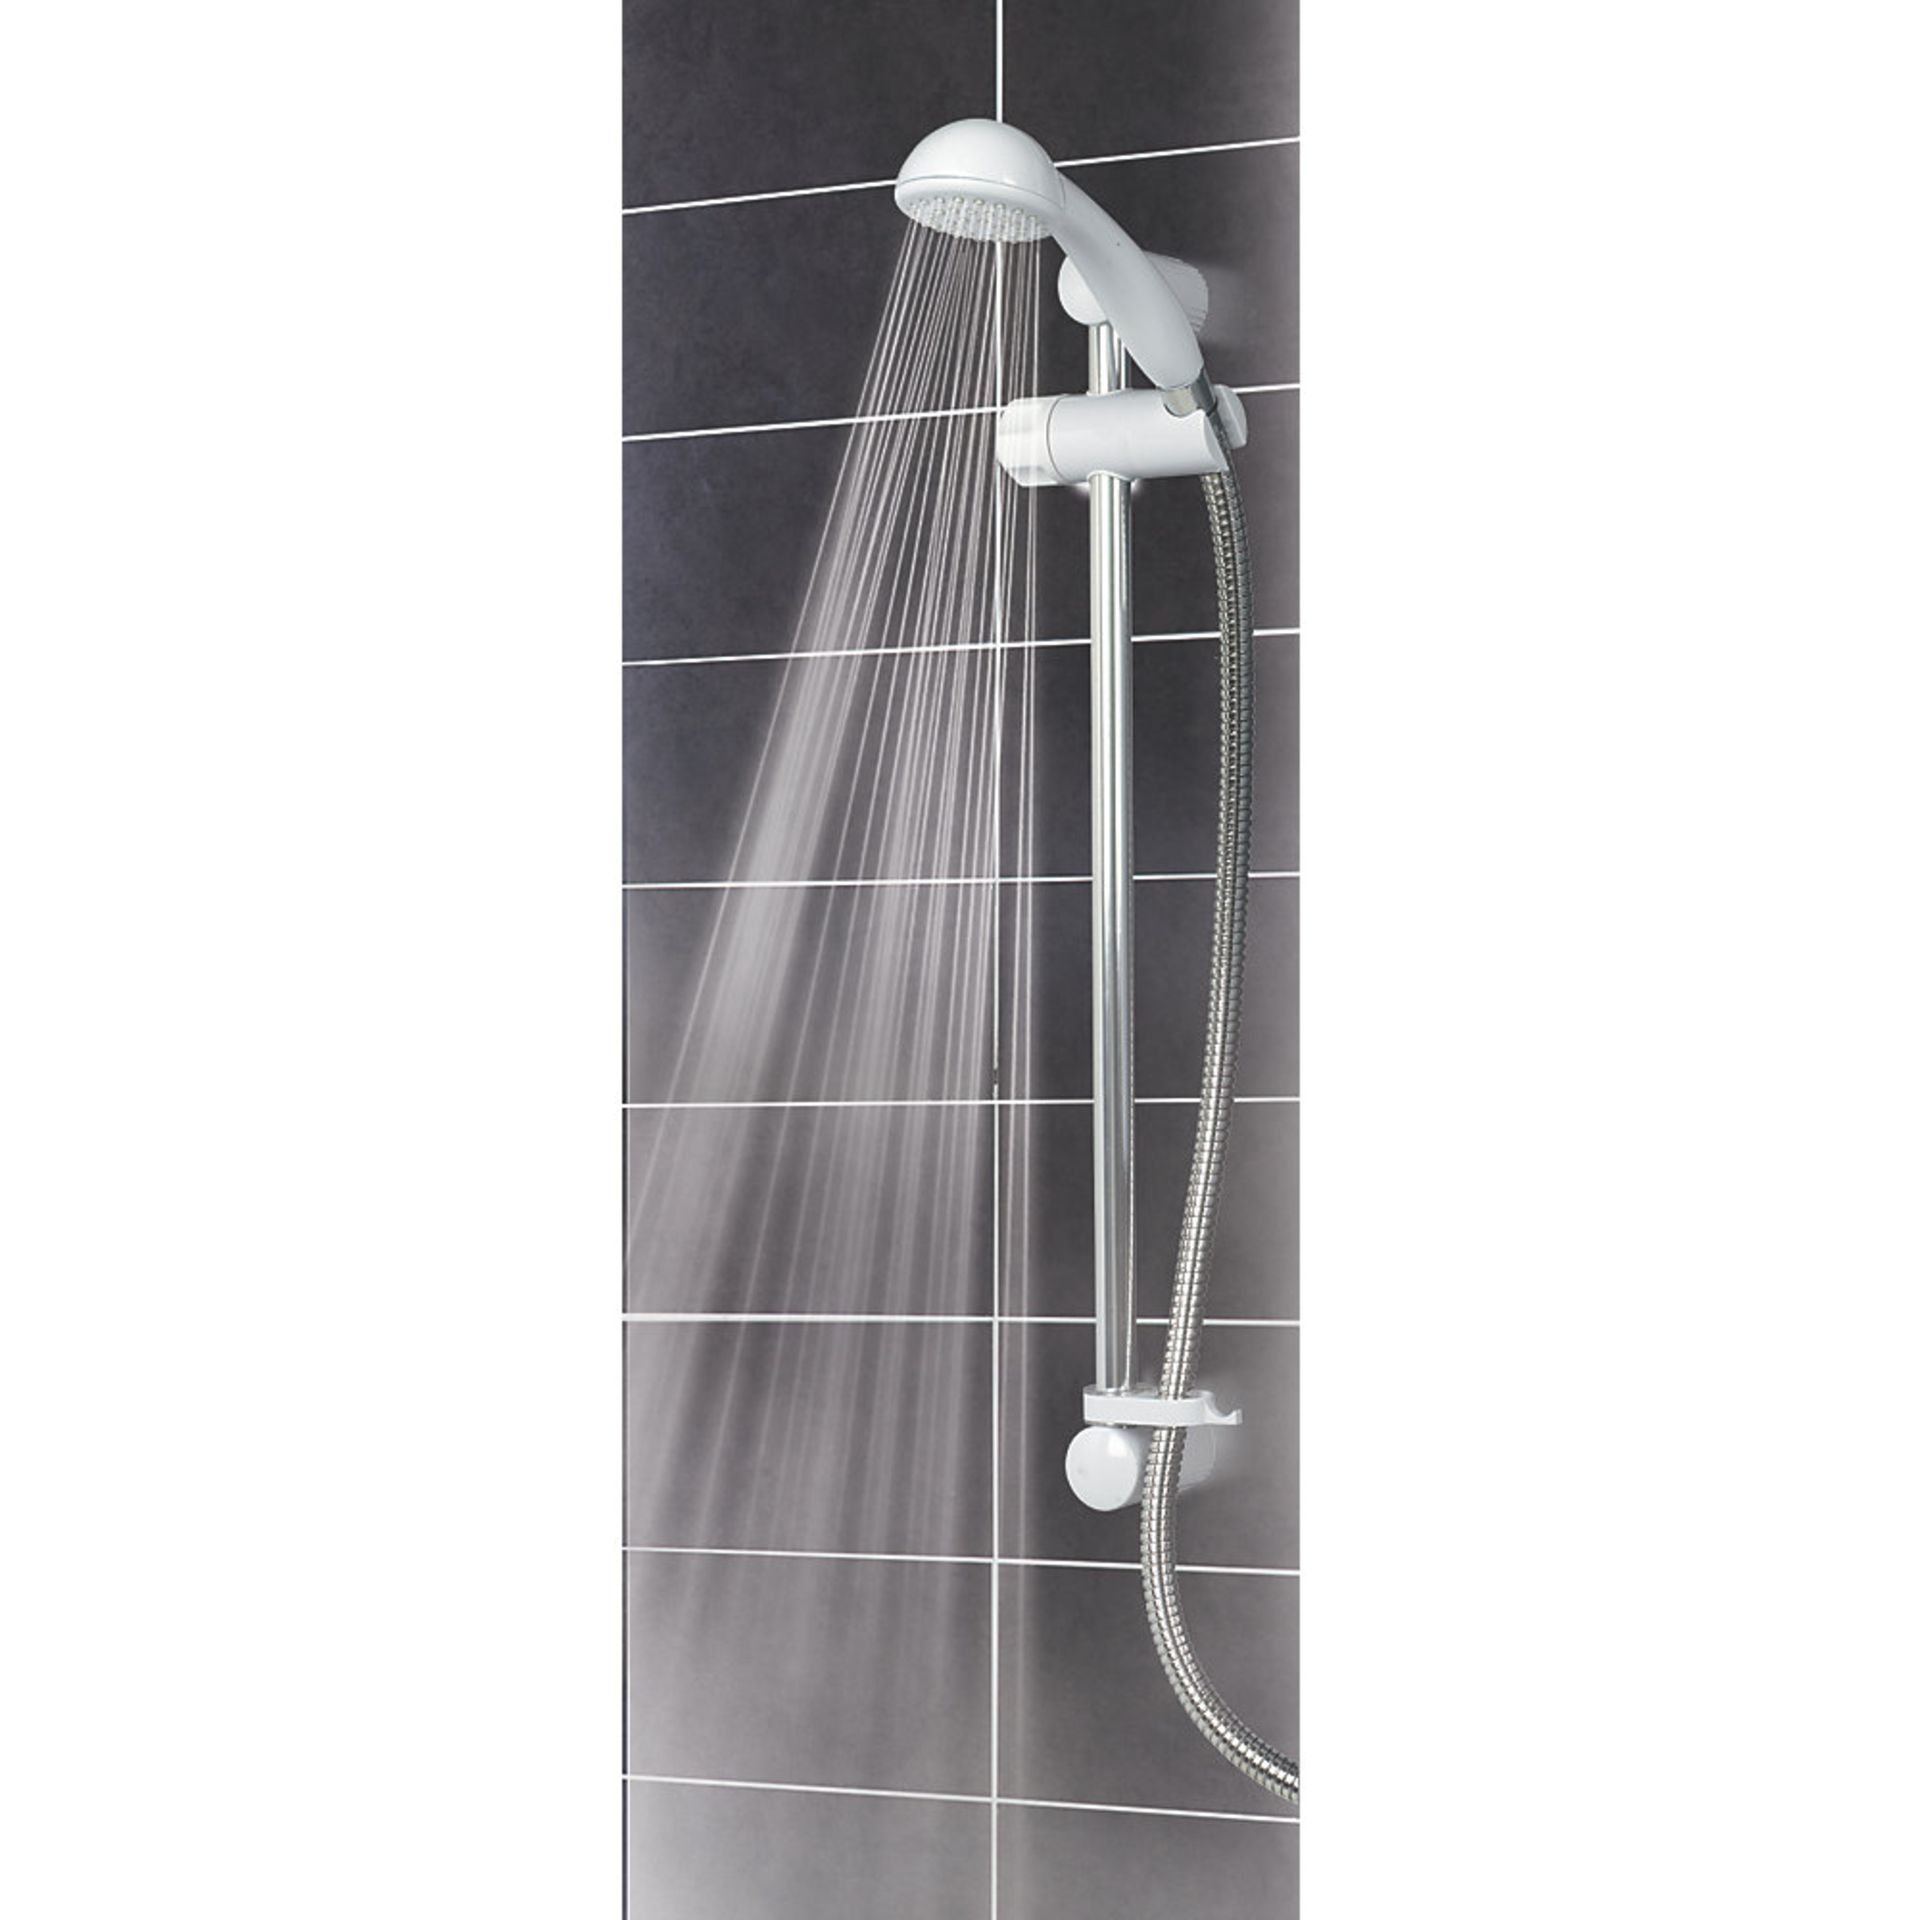 (QP150) TRITON ENRICH WHITE 10.5KW MANUAL ELECTRIC SHOWER. Features multiple cable and water((QP150) - Image 2 of 2